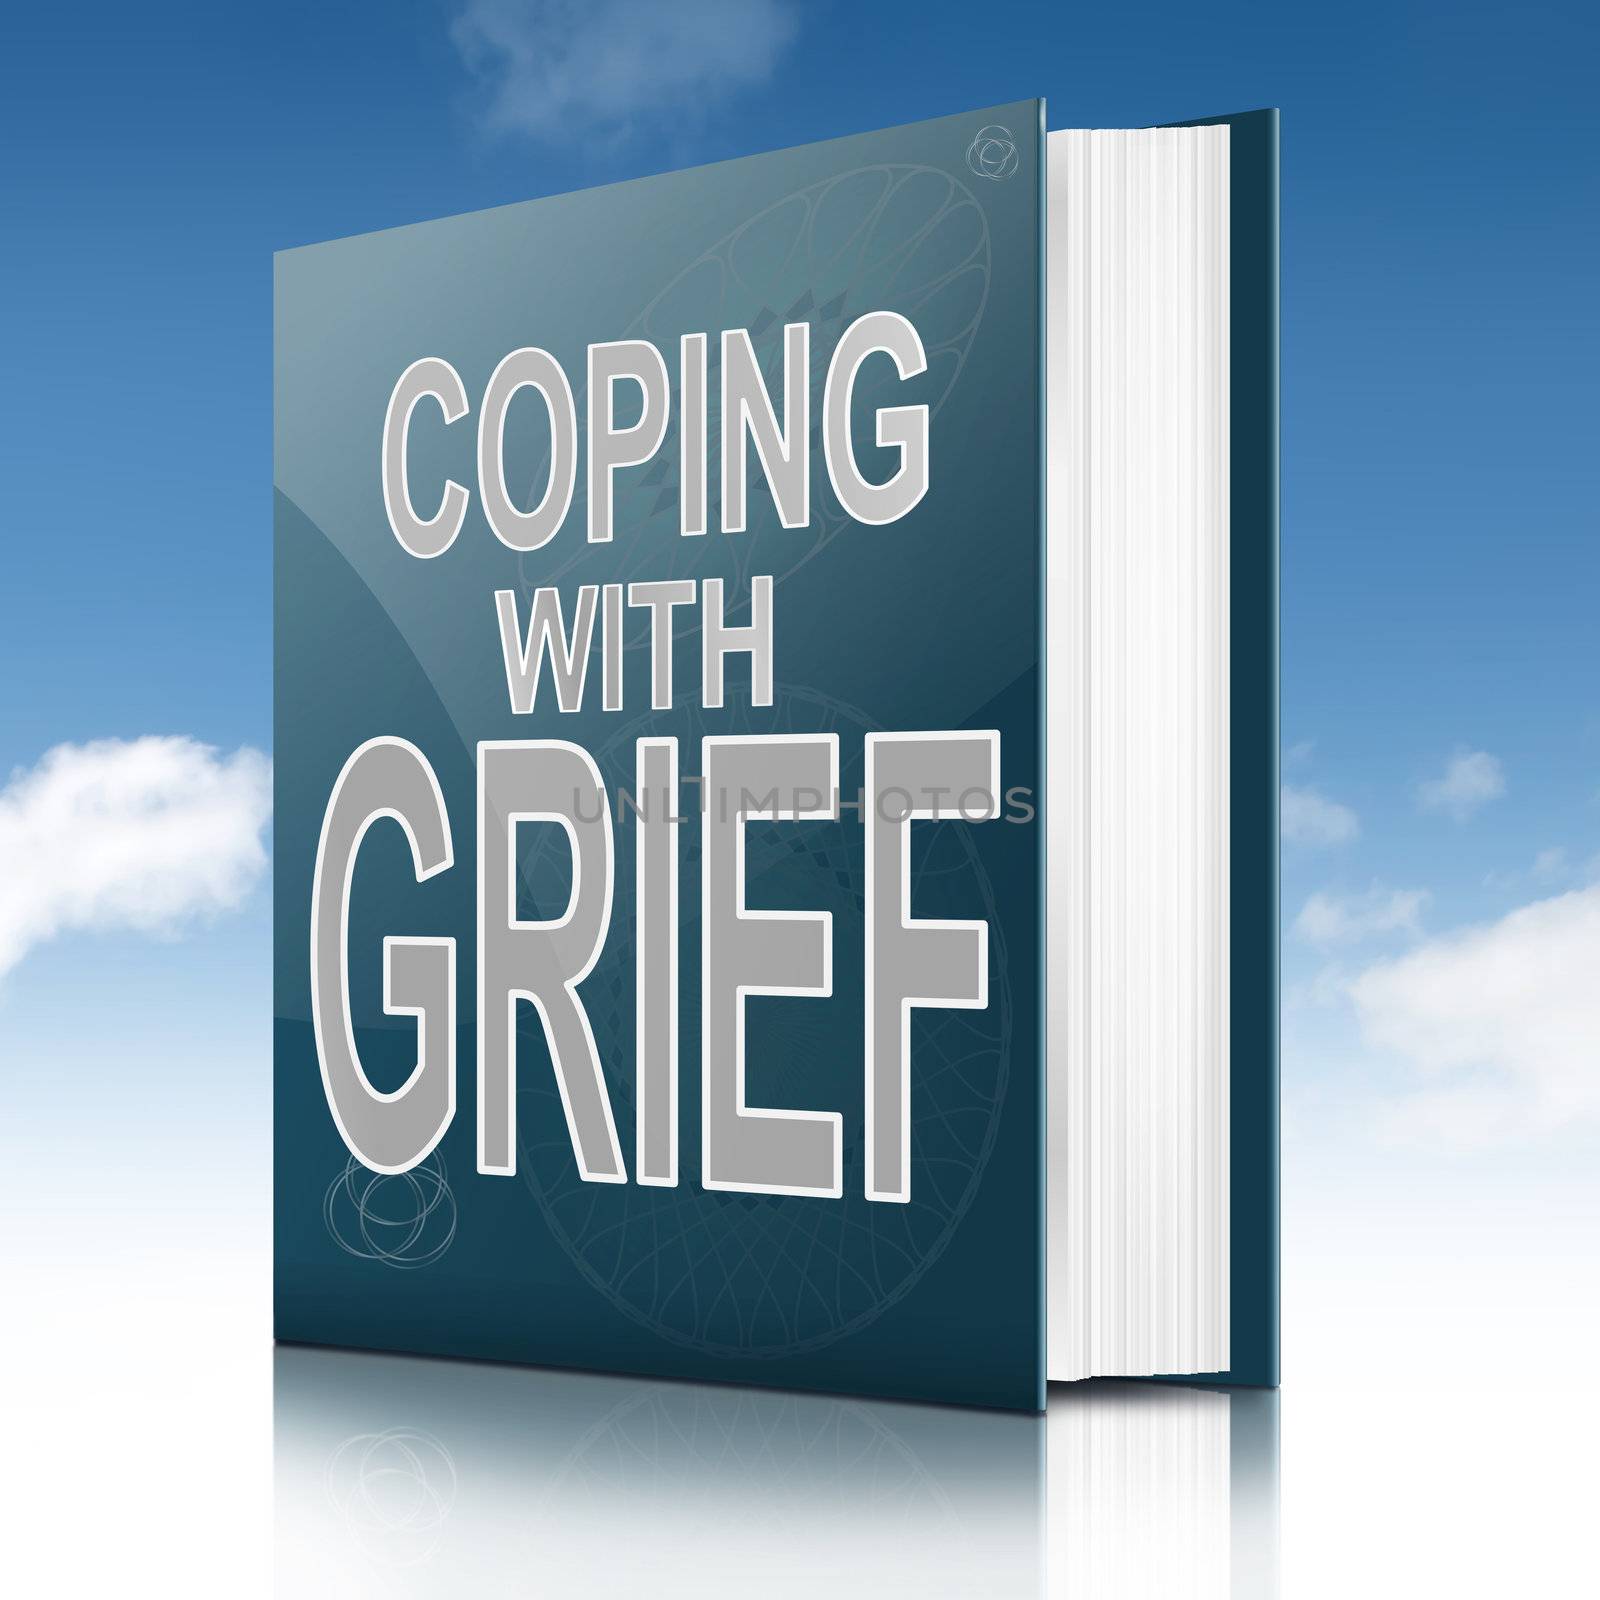 Coping with grief book. by 72soul